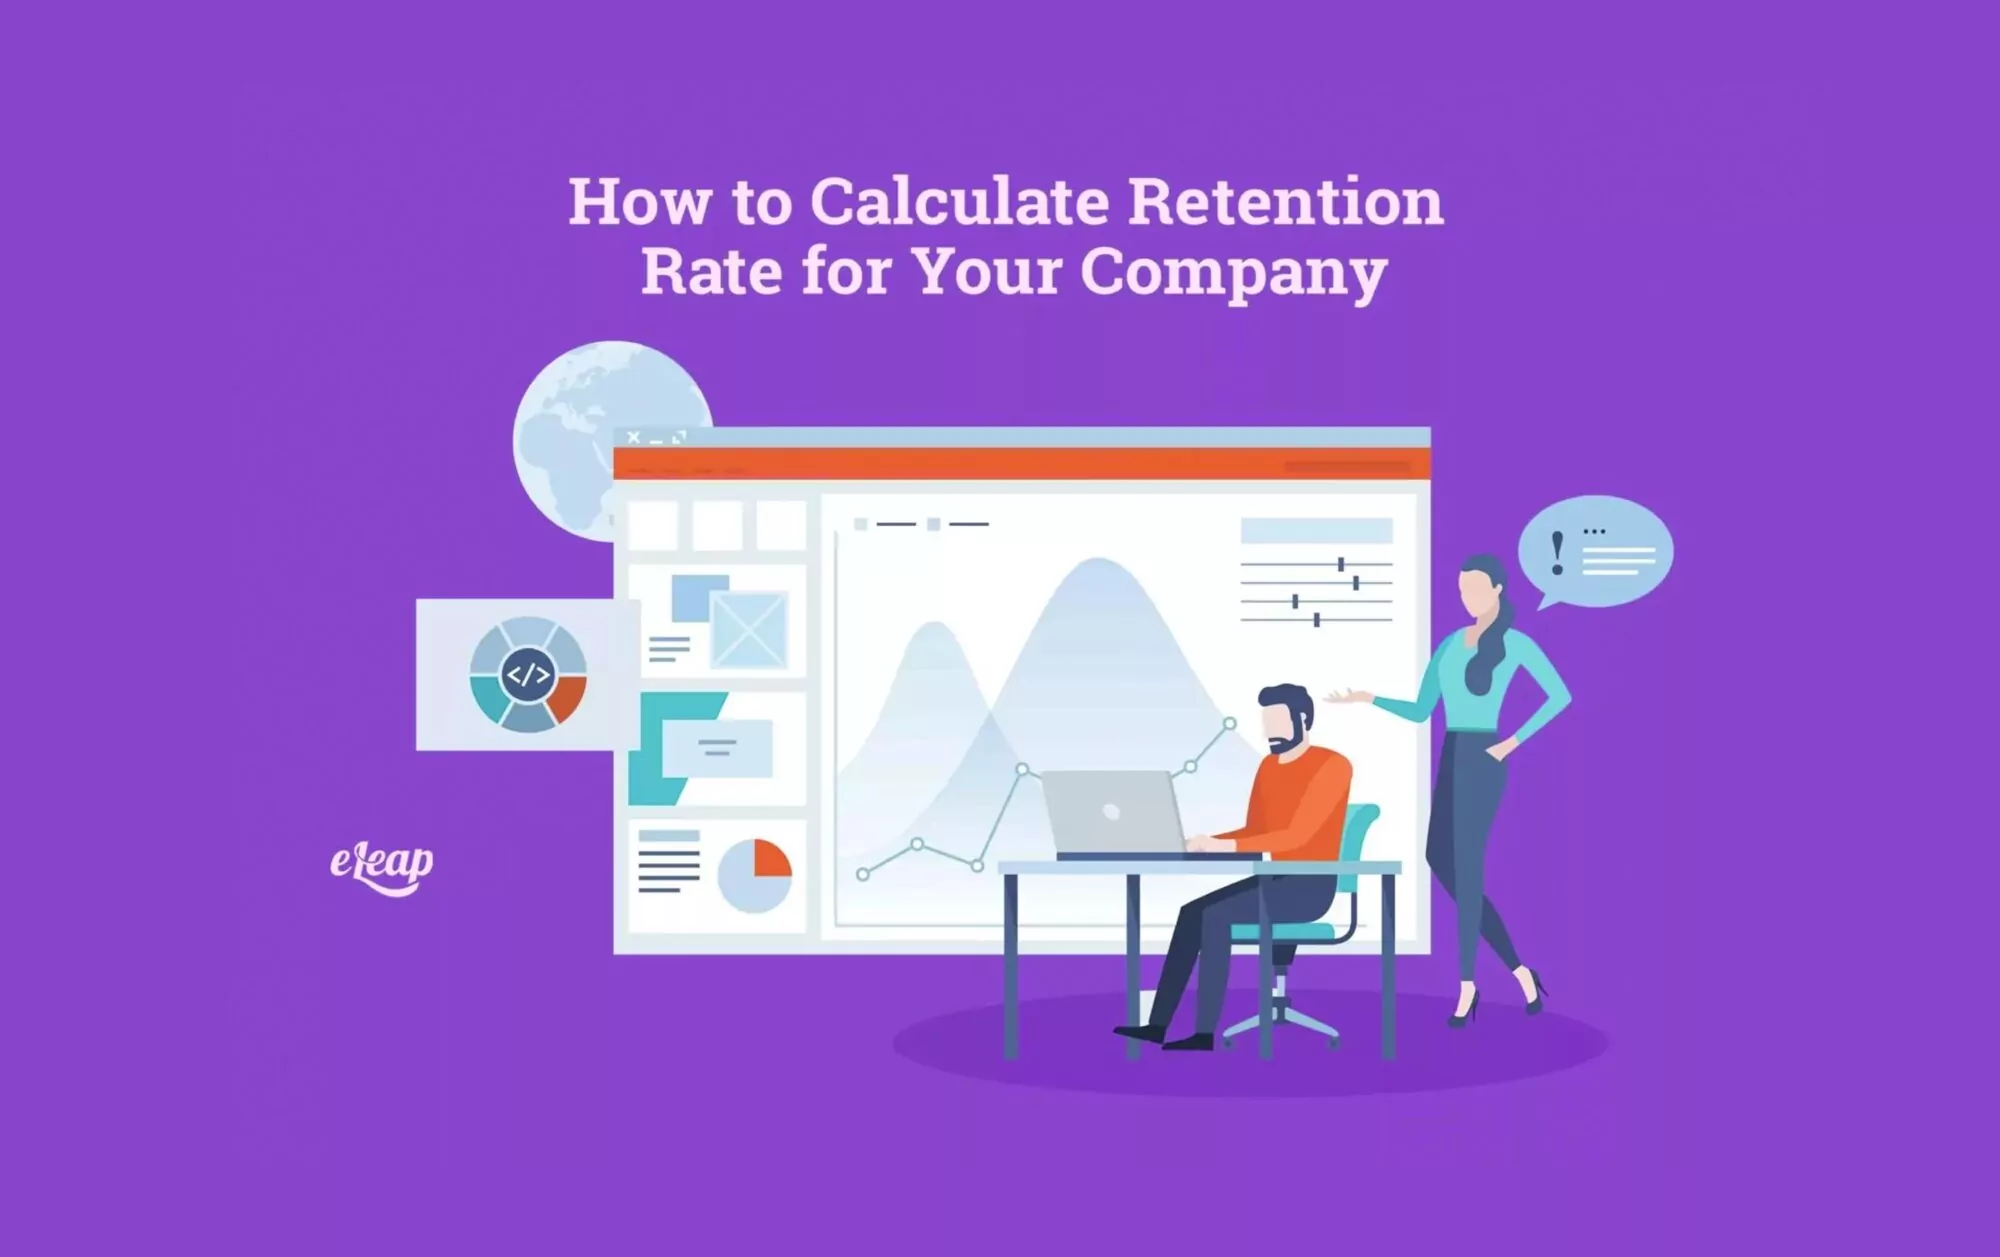 How to Calculate Retention Rate for Your Company